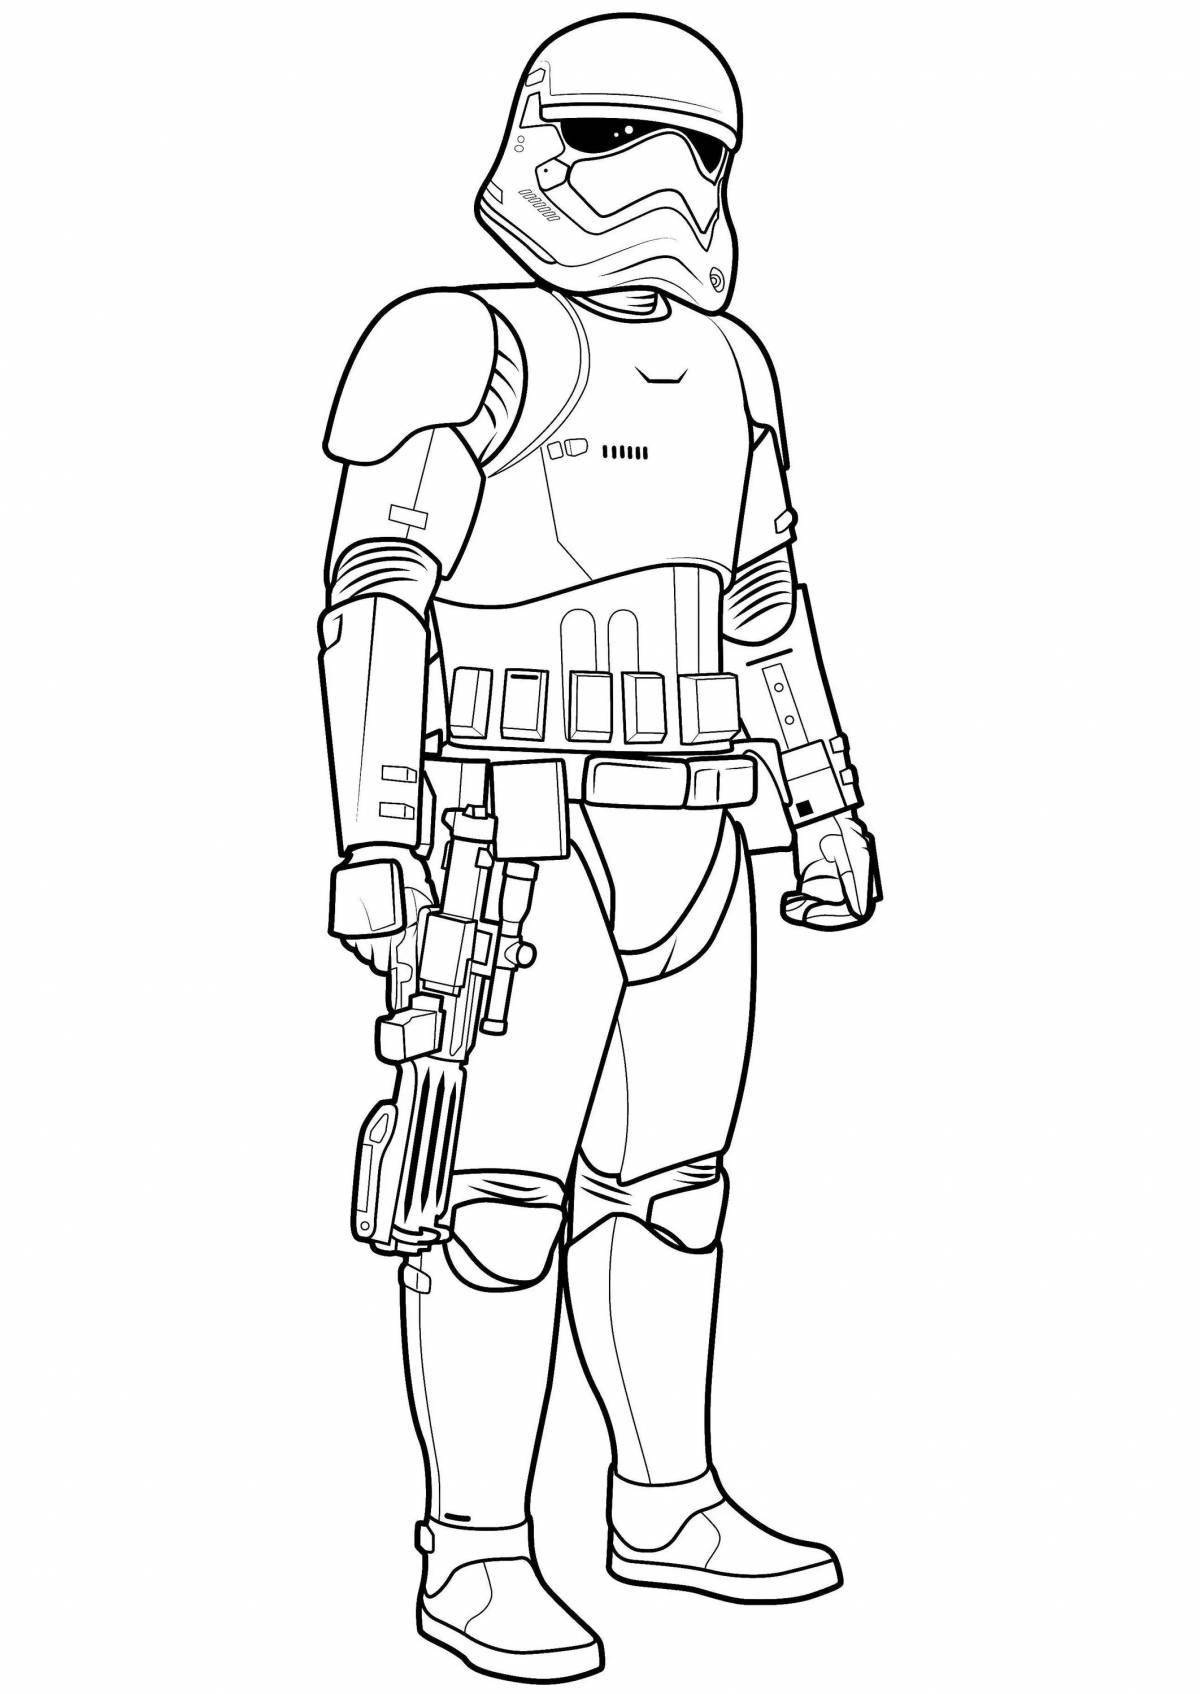 Smart stormtrooper coloring page